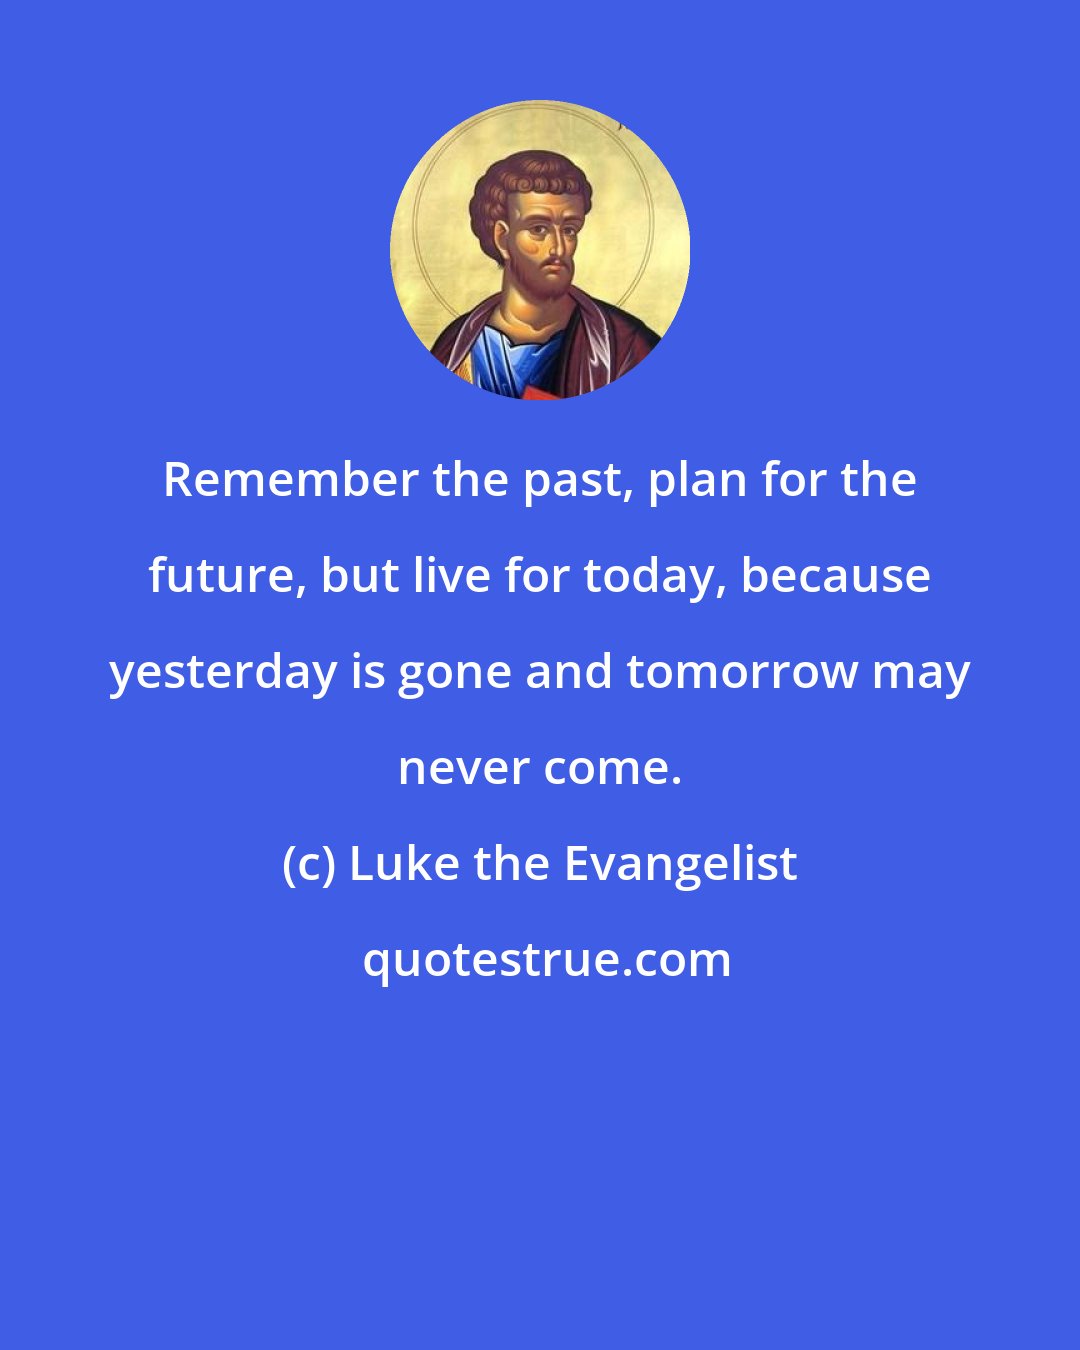 Luke the Evangelist: Remember the past, plan for the future, but live for today, because yesterday is gone and tomorrow may never come.